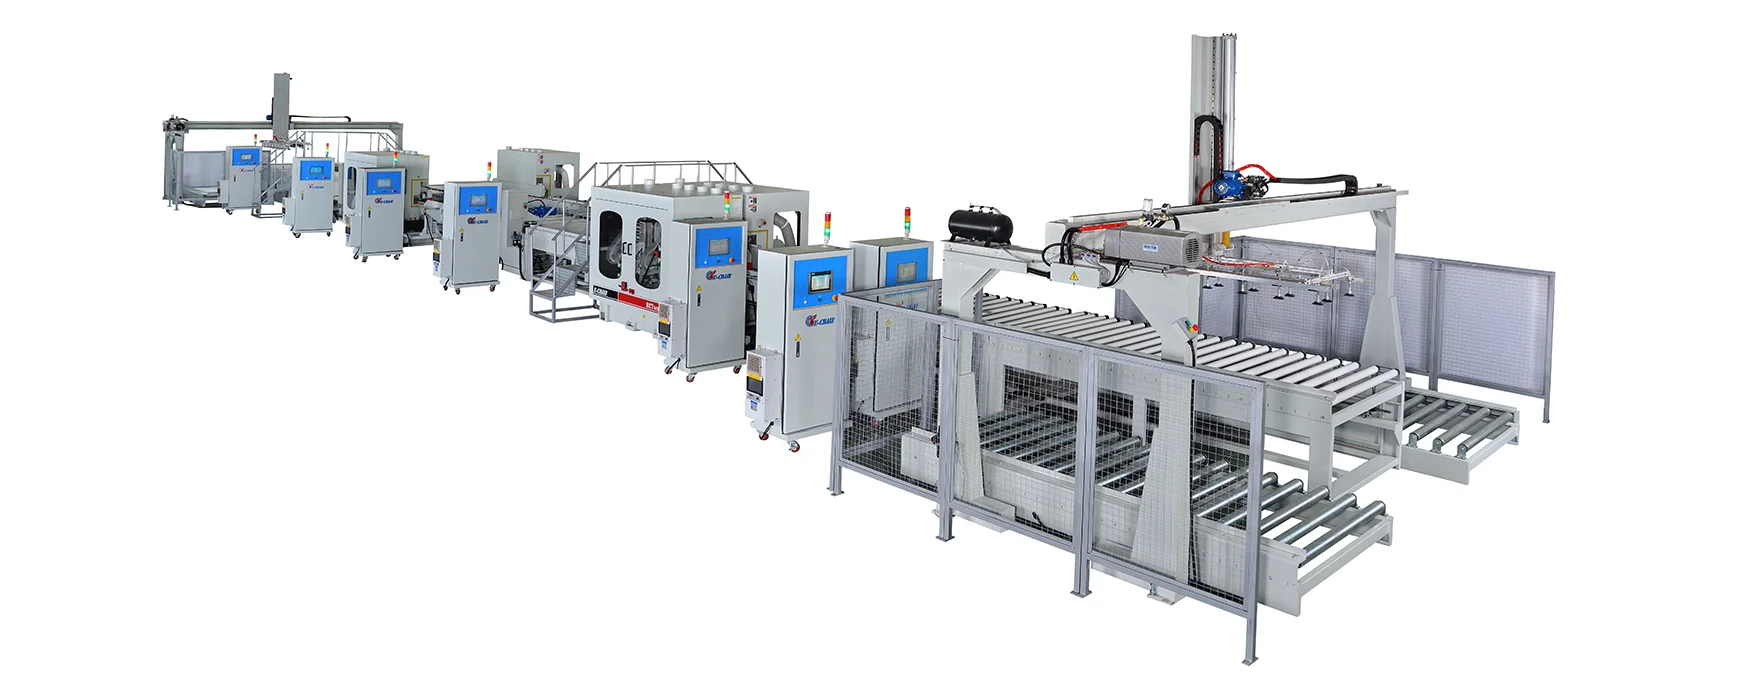 Fully Automatic Line of Double End Tenoners